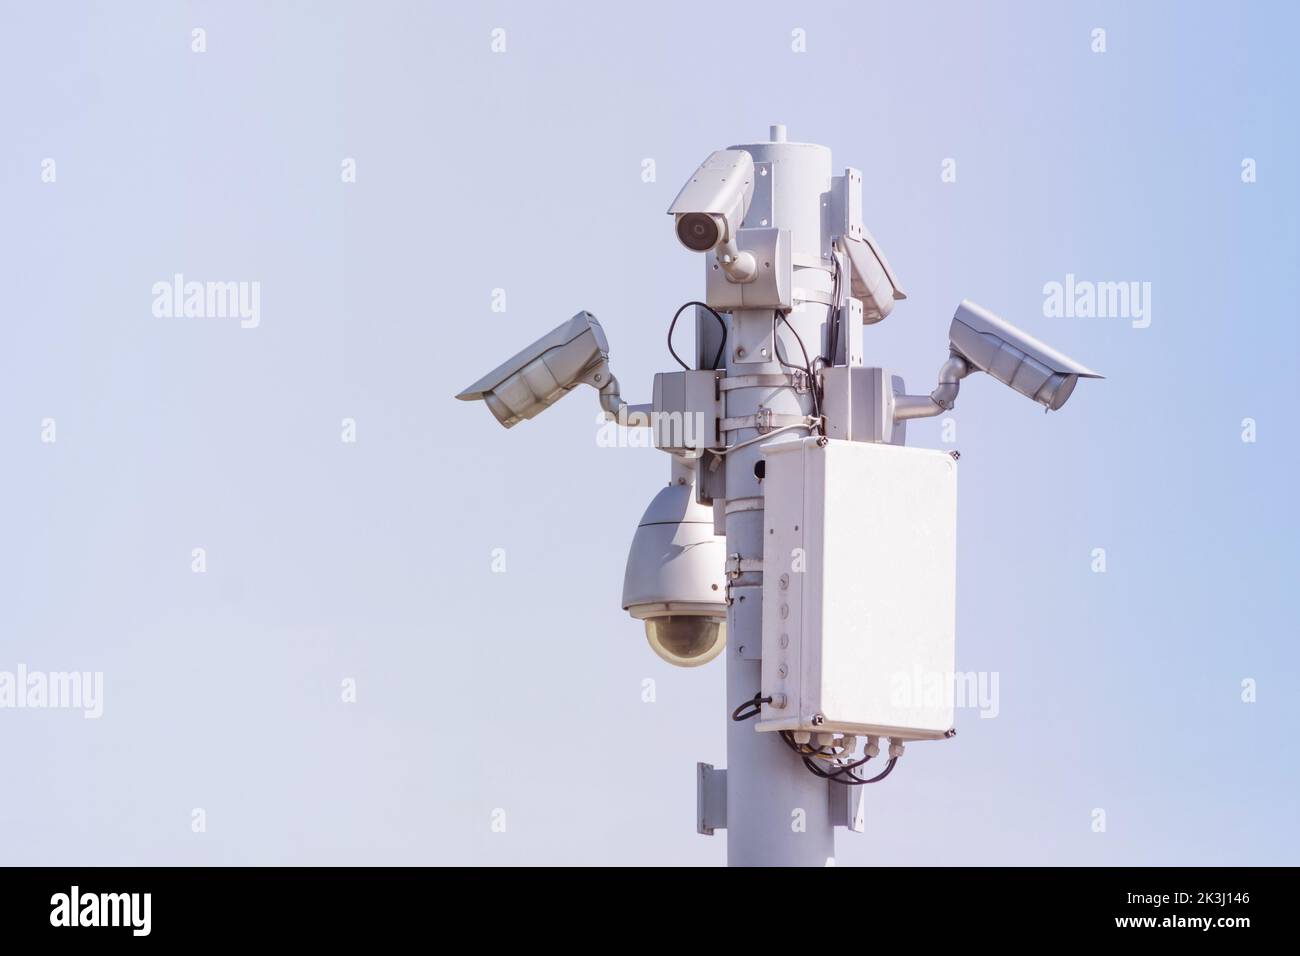 Public security cameras, capture the townspeople. White cameras are mounted on a metal pole Stock Photo